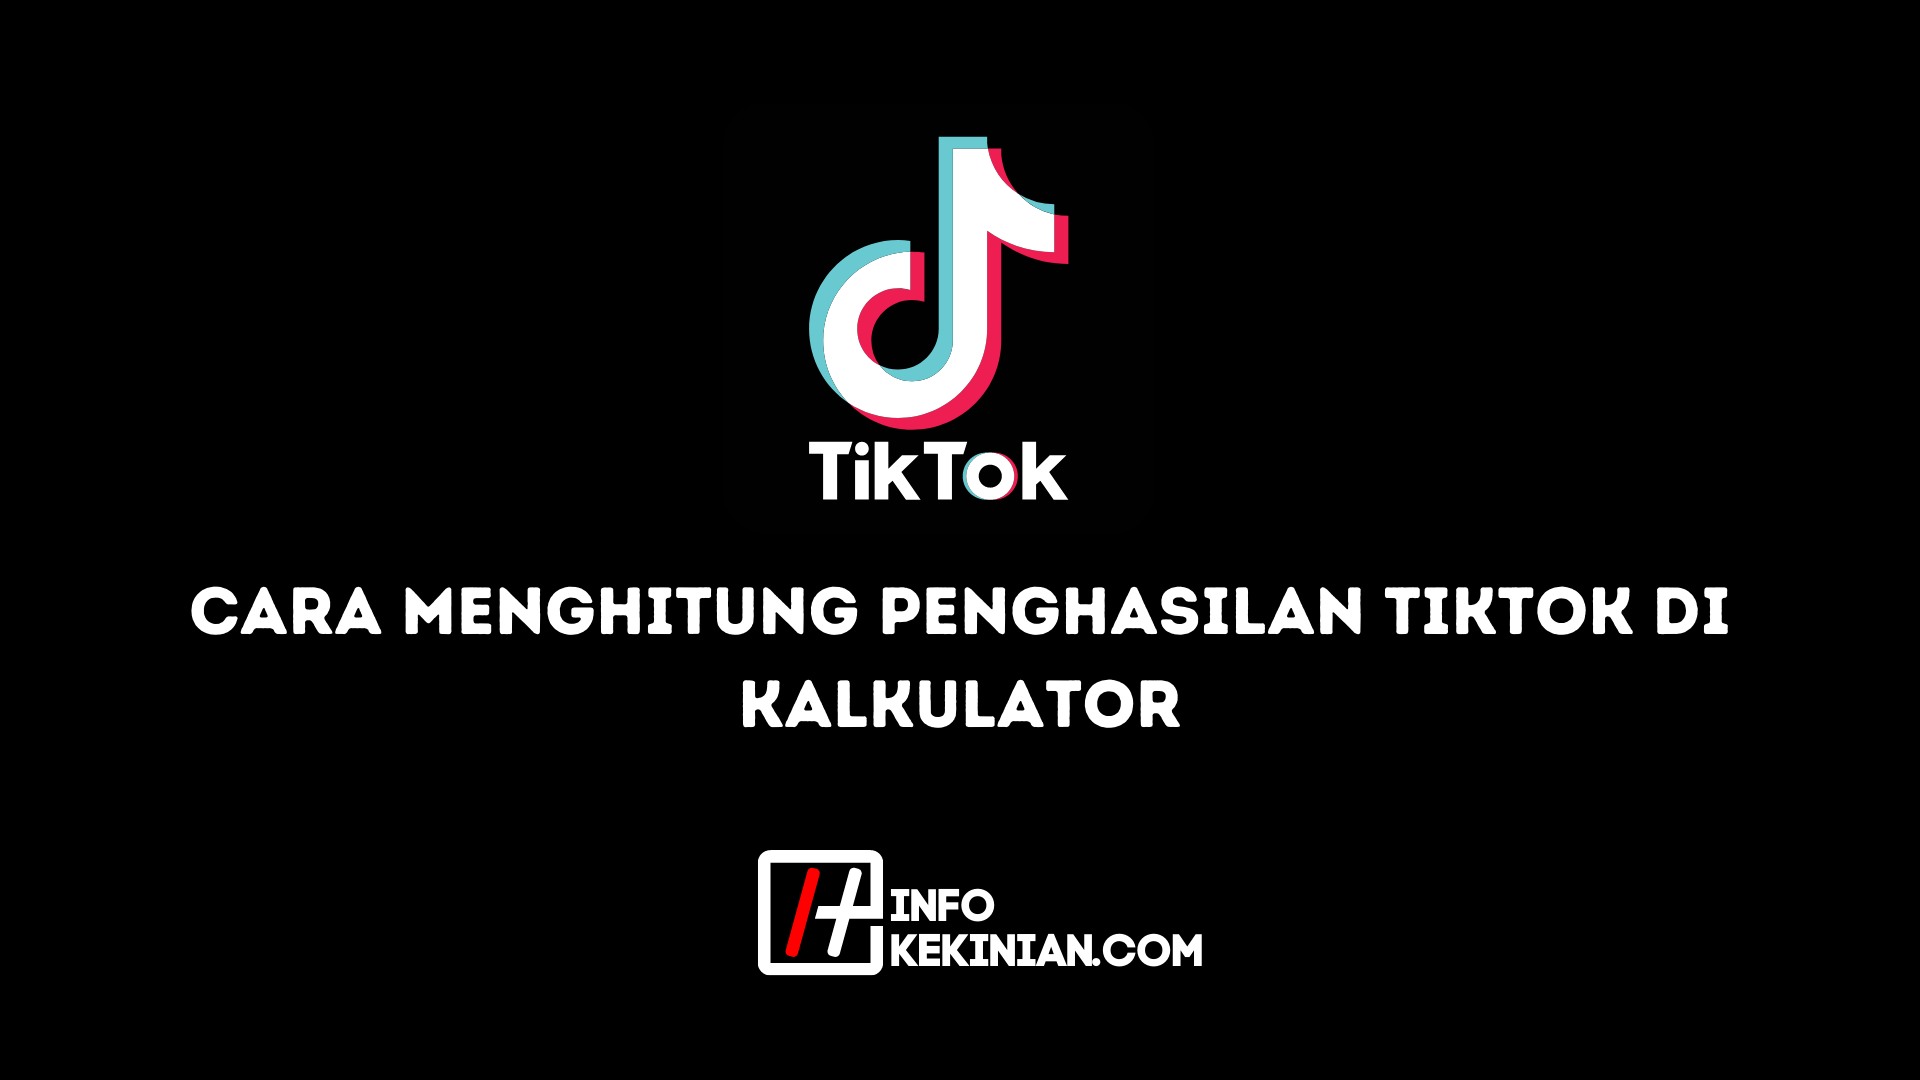 How to Calculate TikTok Earnings on the Calculator